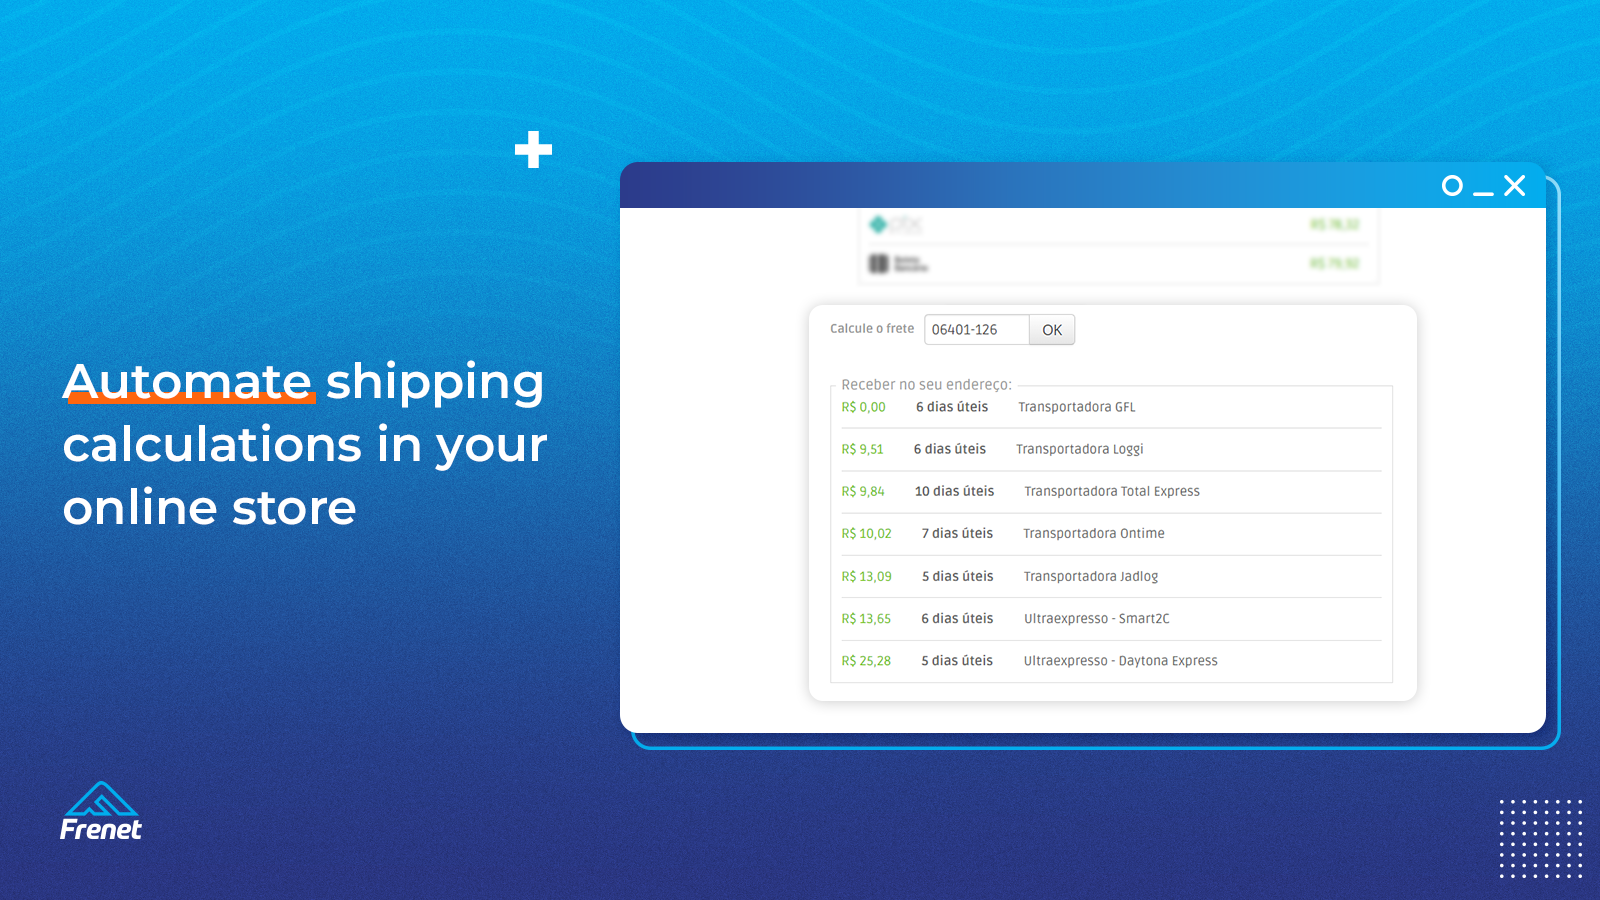 Automate shipping calculations in your online store